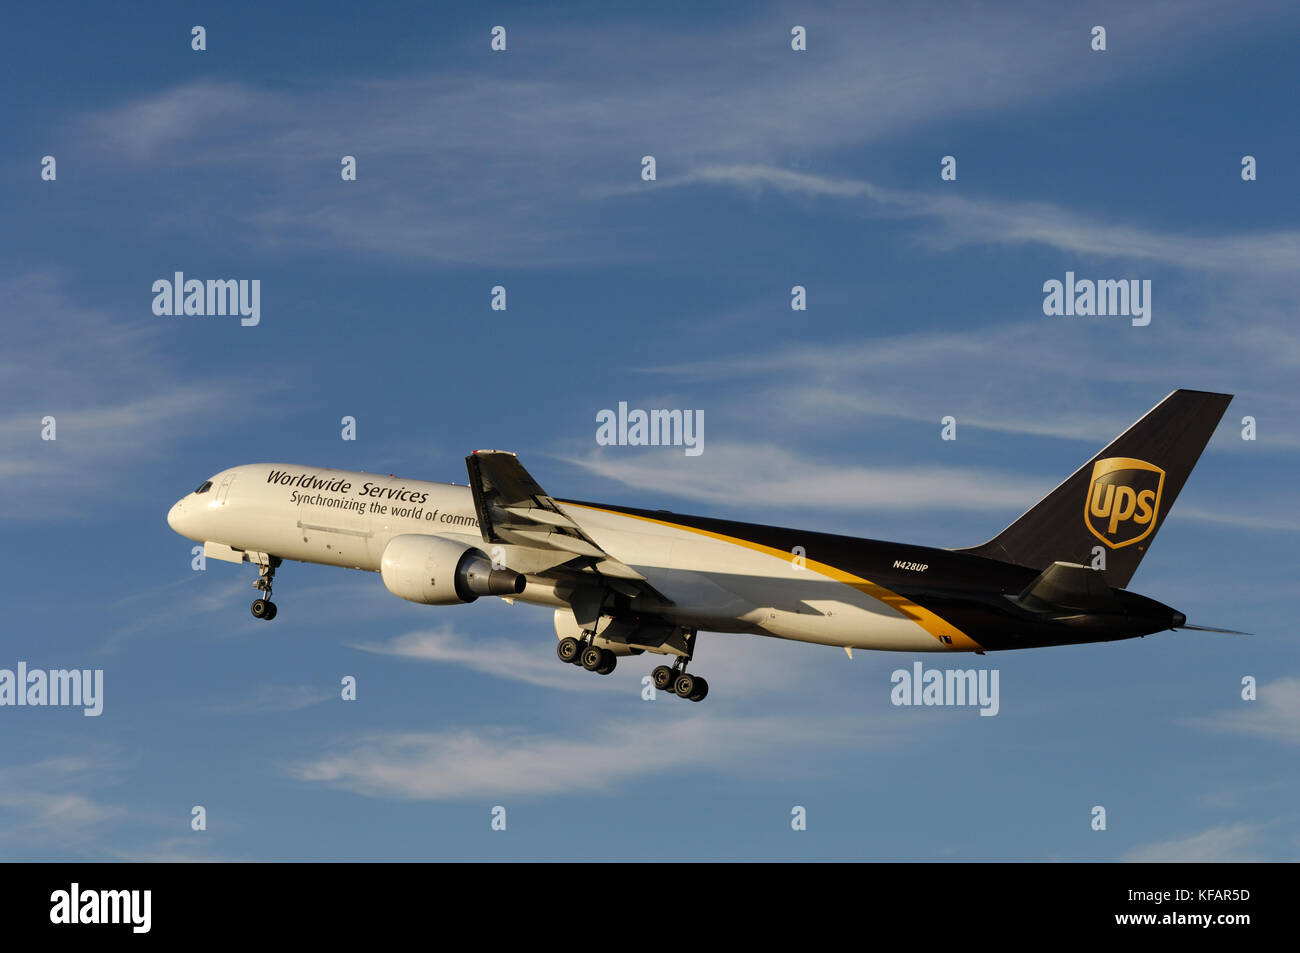 a UPS United Parcel Service Boeing 757-200 climbing out after take-off with undercarriage retracting Stock Photo